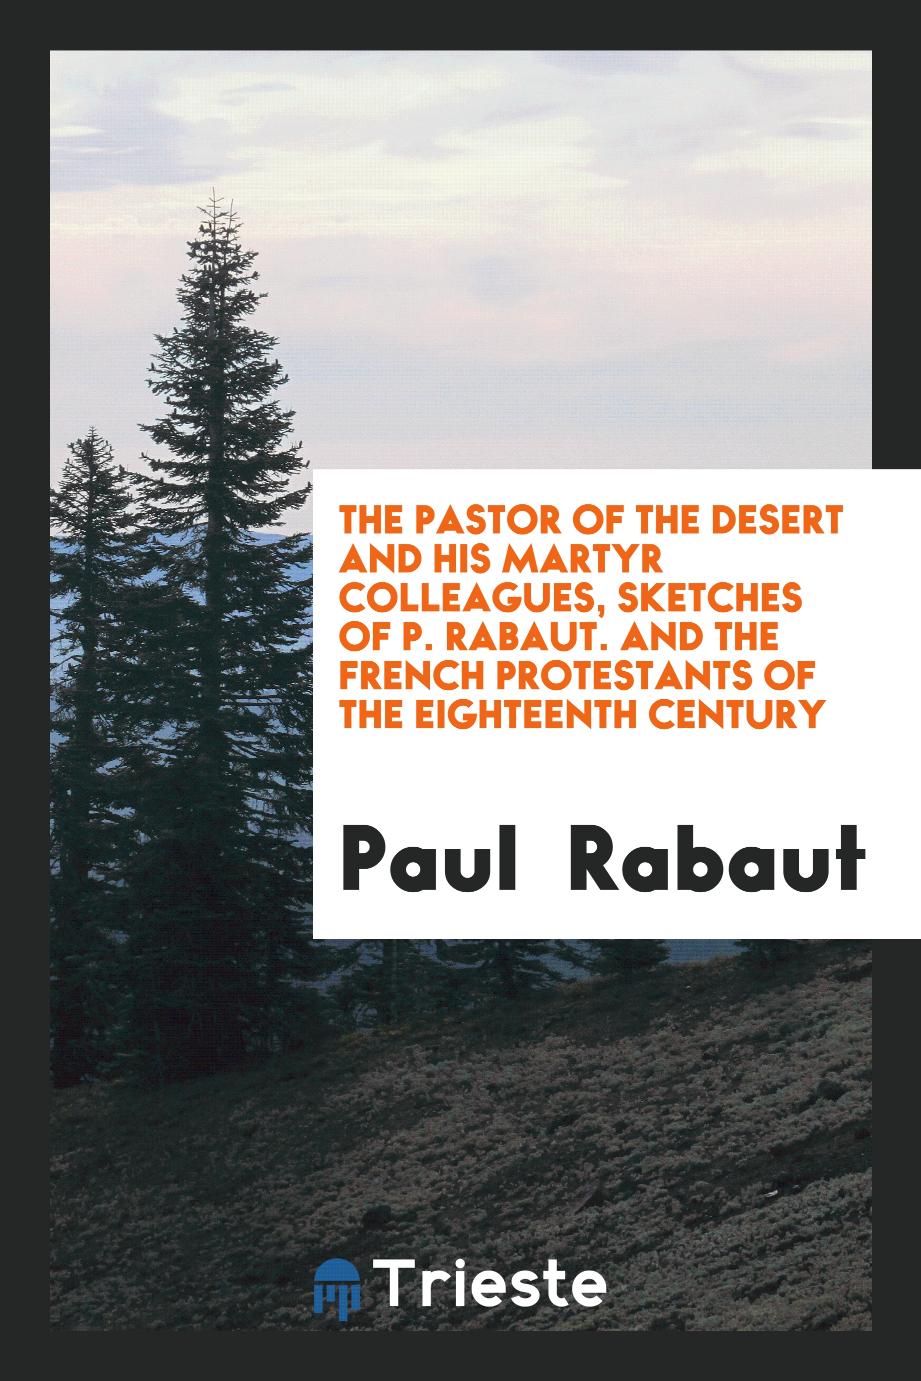 The Pastor of the Desert and His Martyr Colleagues, Sketches of P. Rabaut. And the French Protestants of the Eighteenth Century